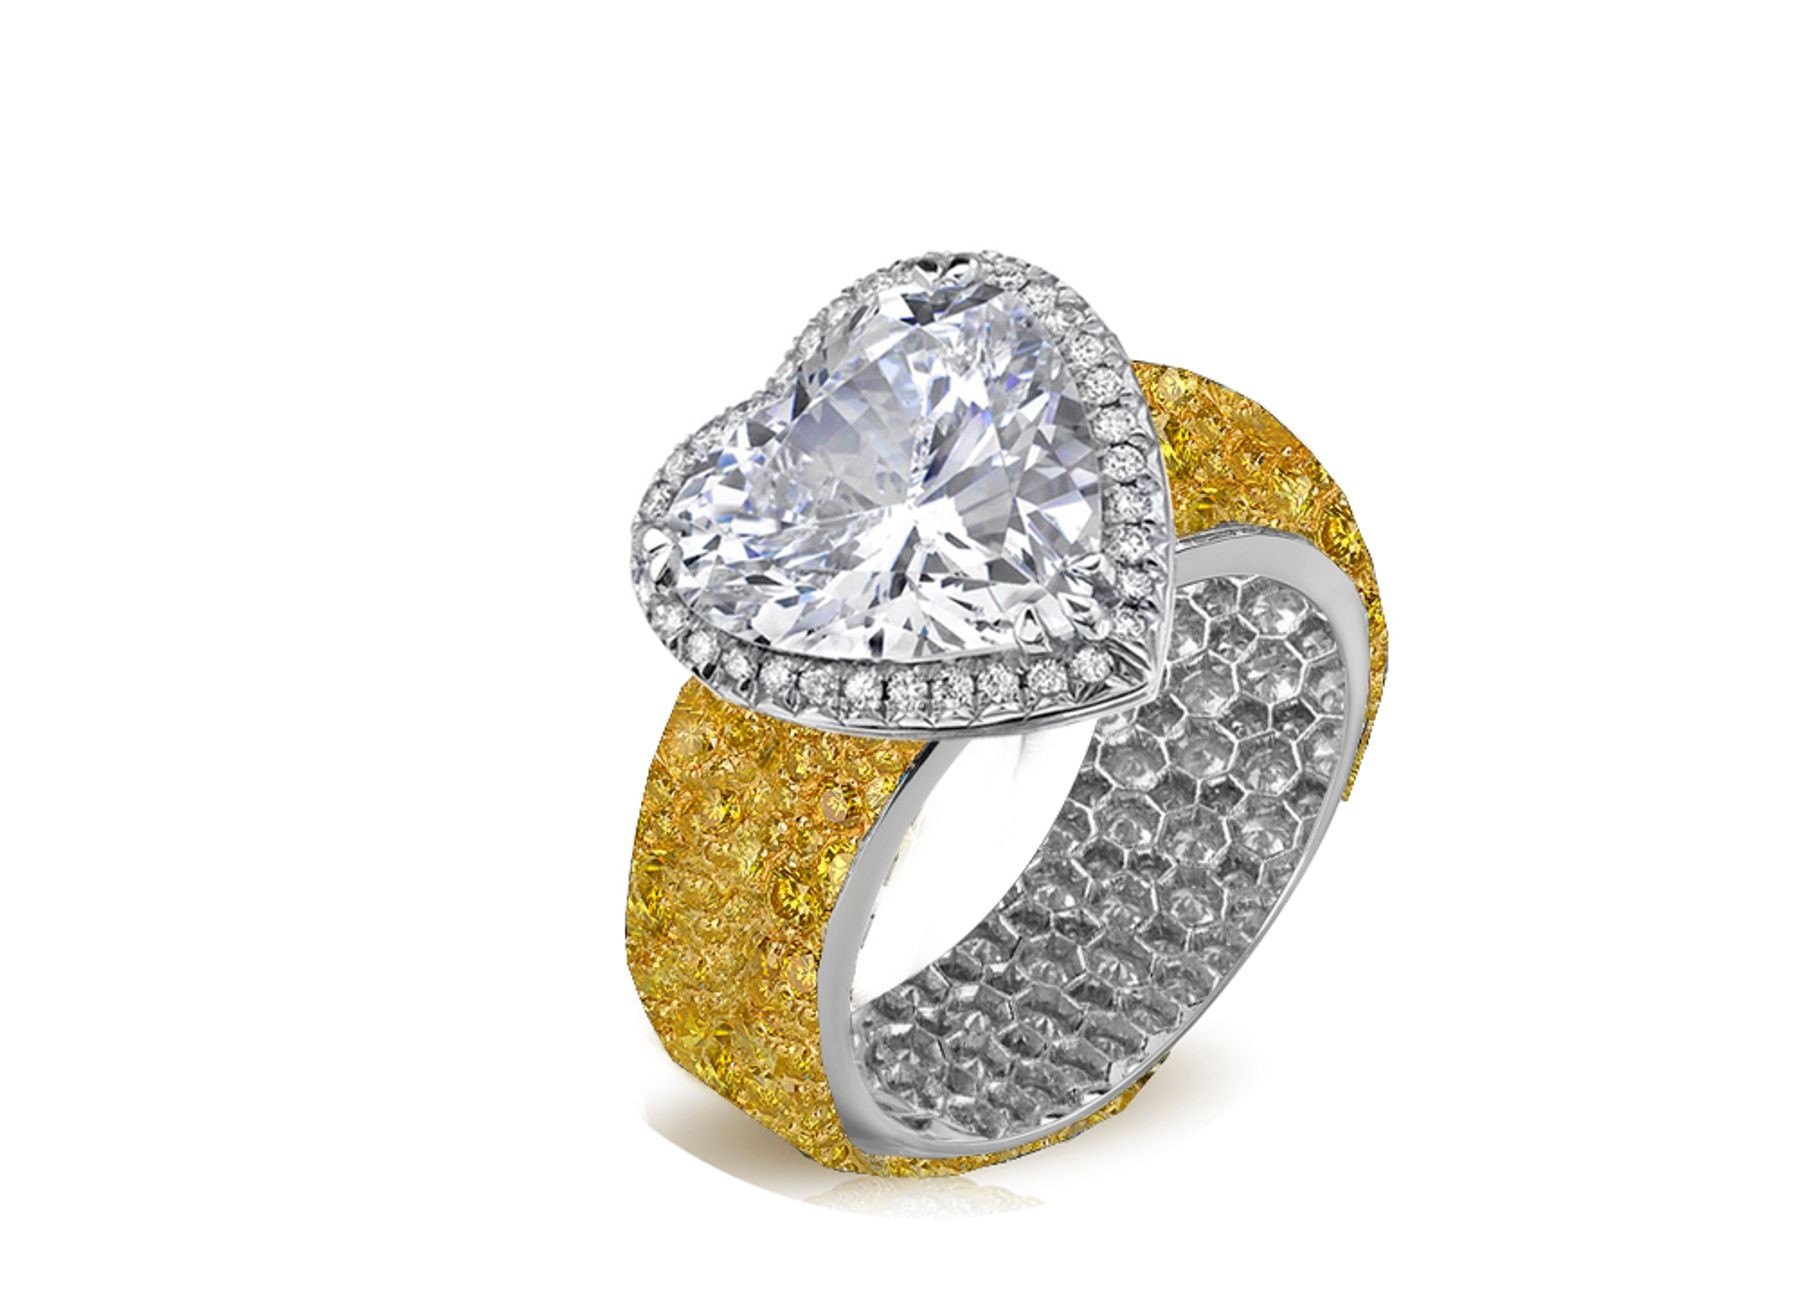 Halo Heart Diamond Ring with Diamonds & Yellow Sapphires in Gold or Platinum